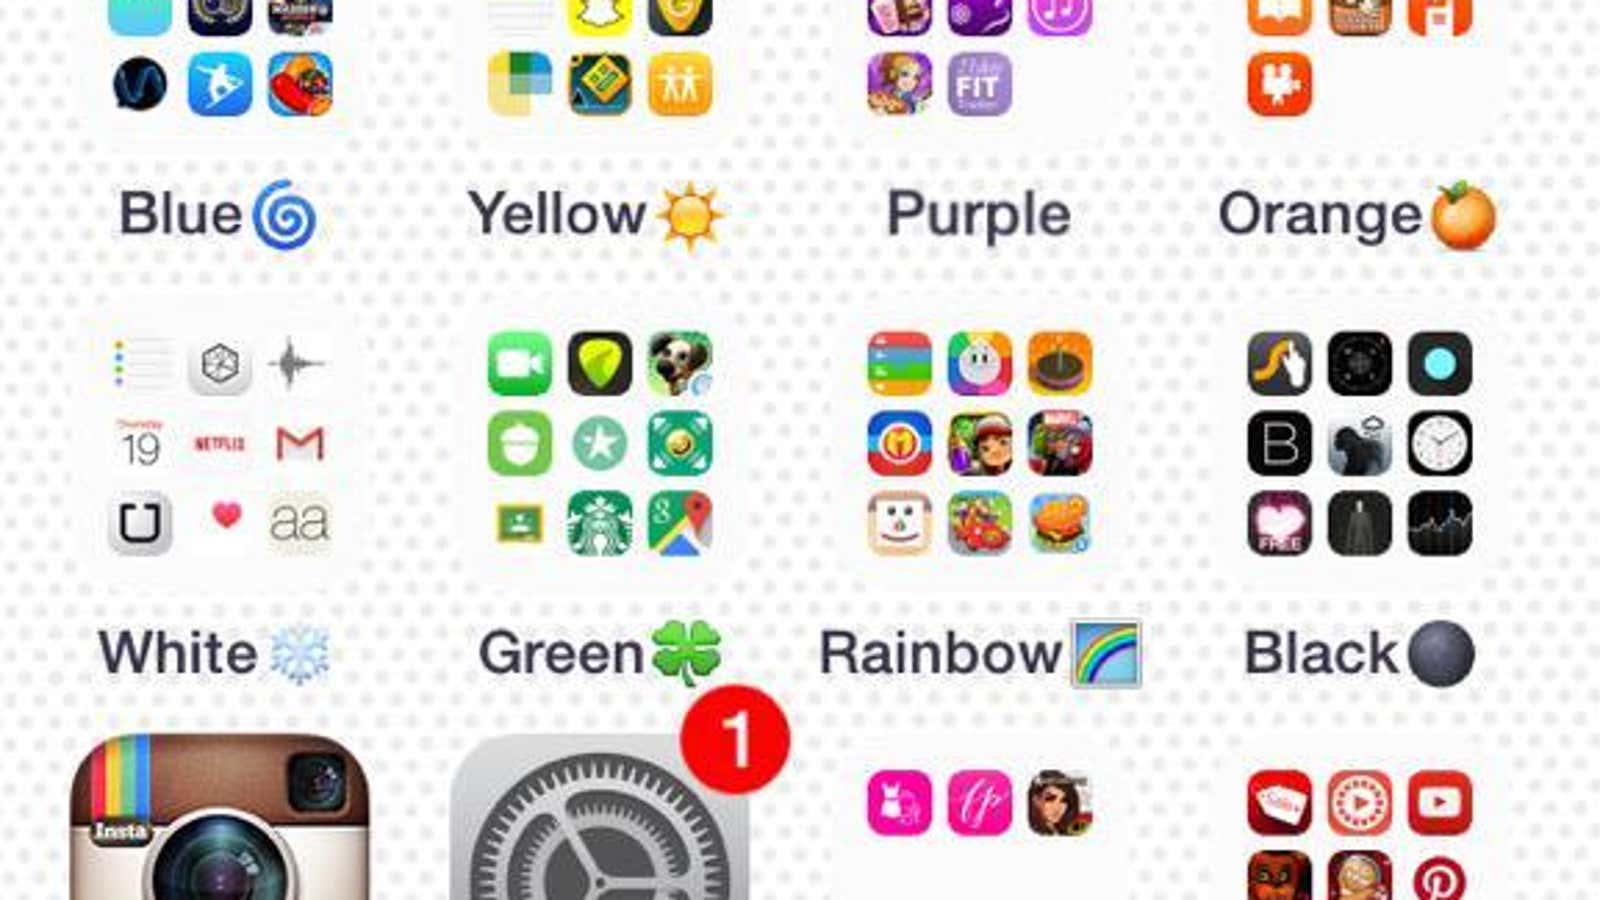 What’s missing from this 13-year-old girl’s iPhone home screen?